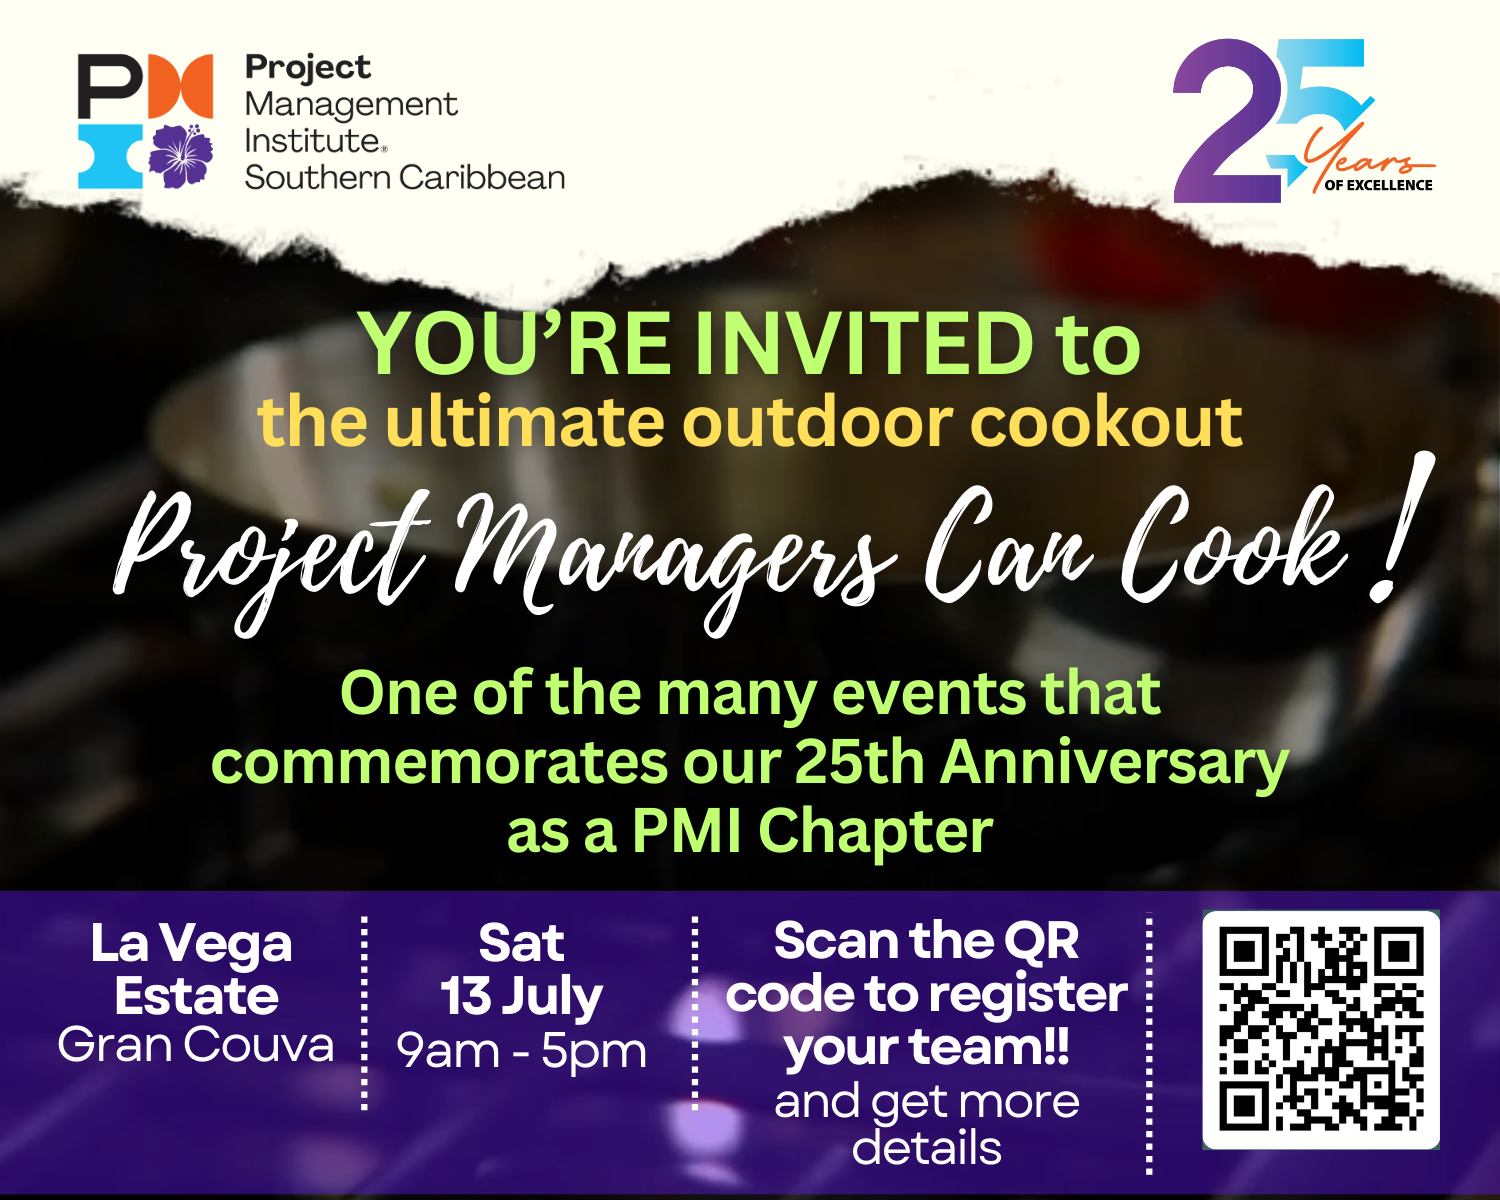 Project-Managers-Can-Cook-flyer.png